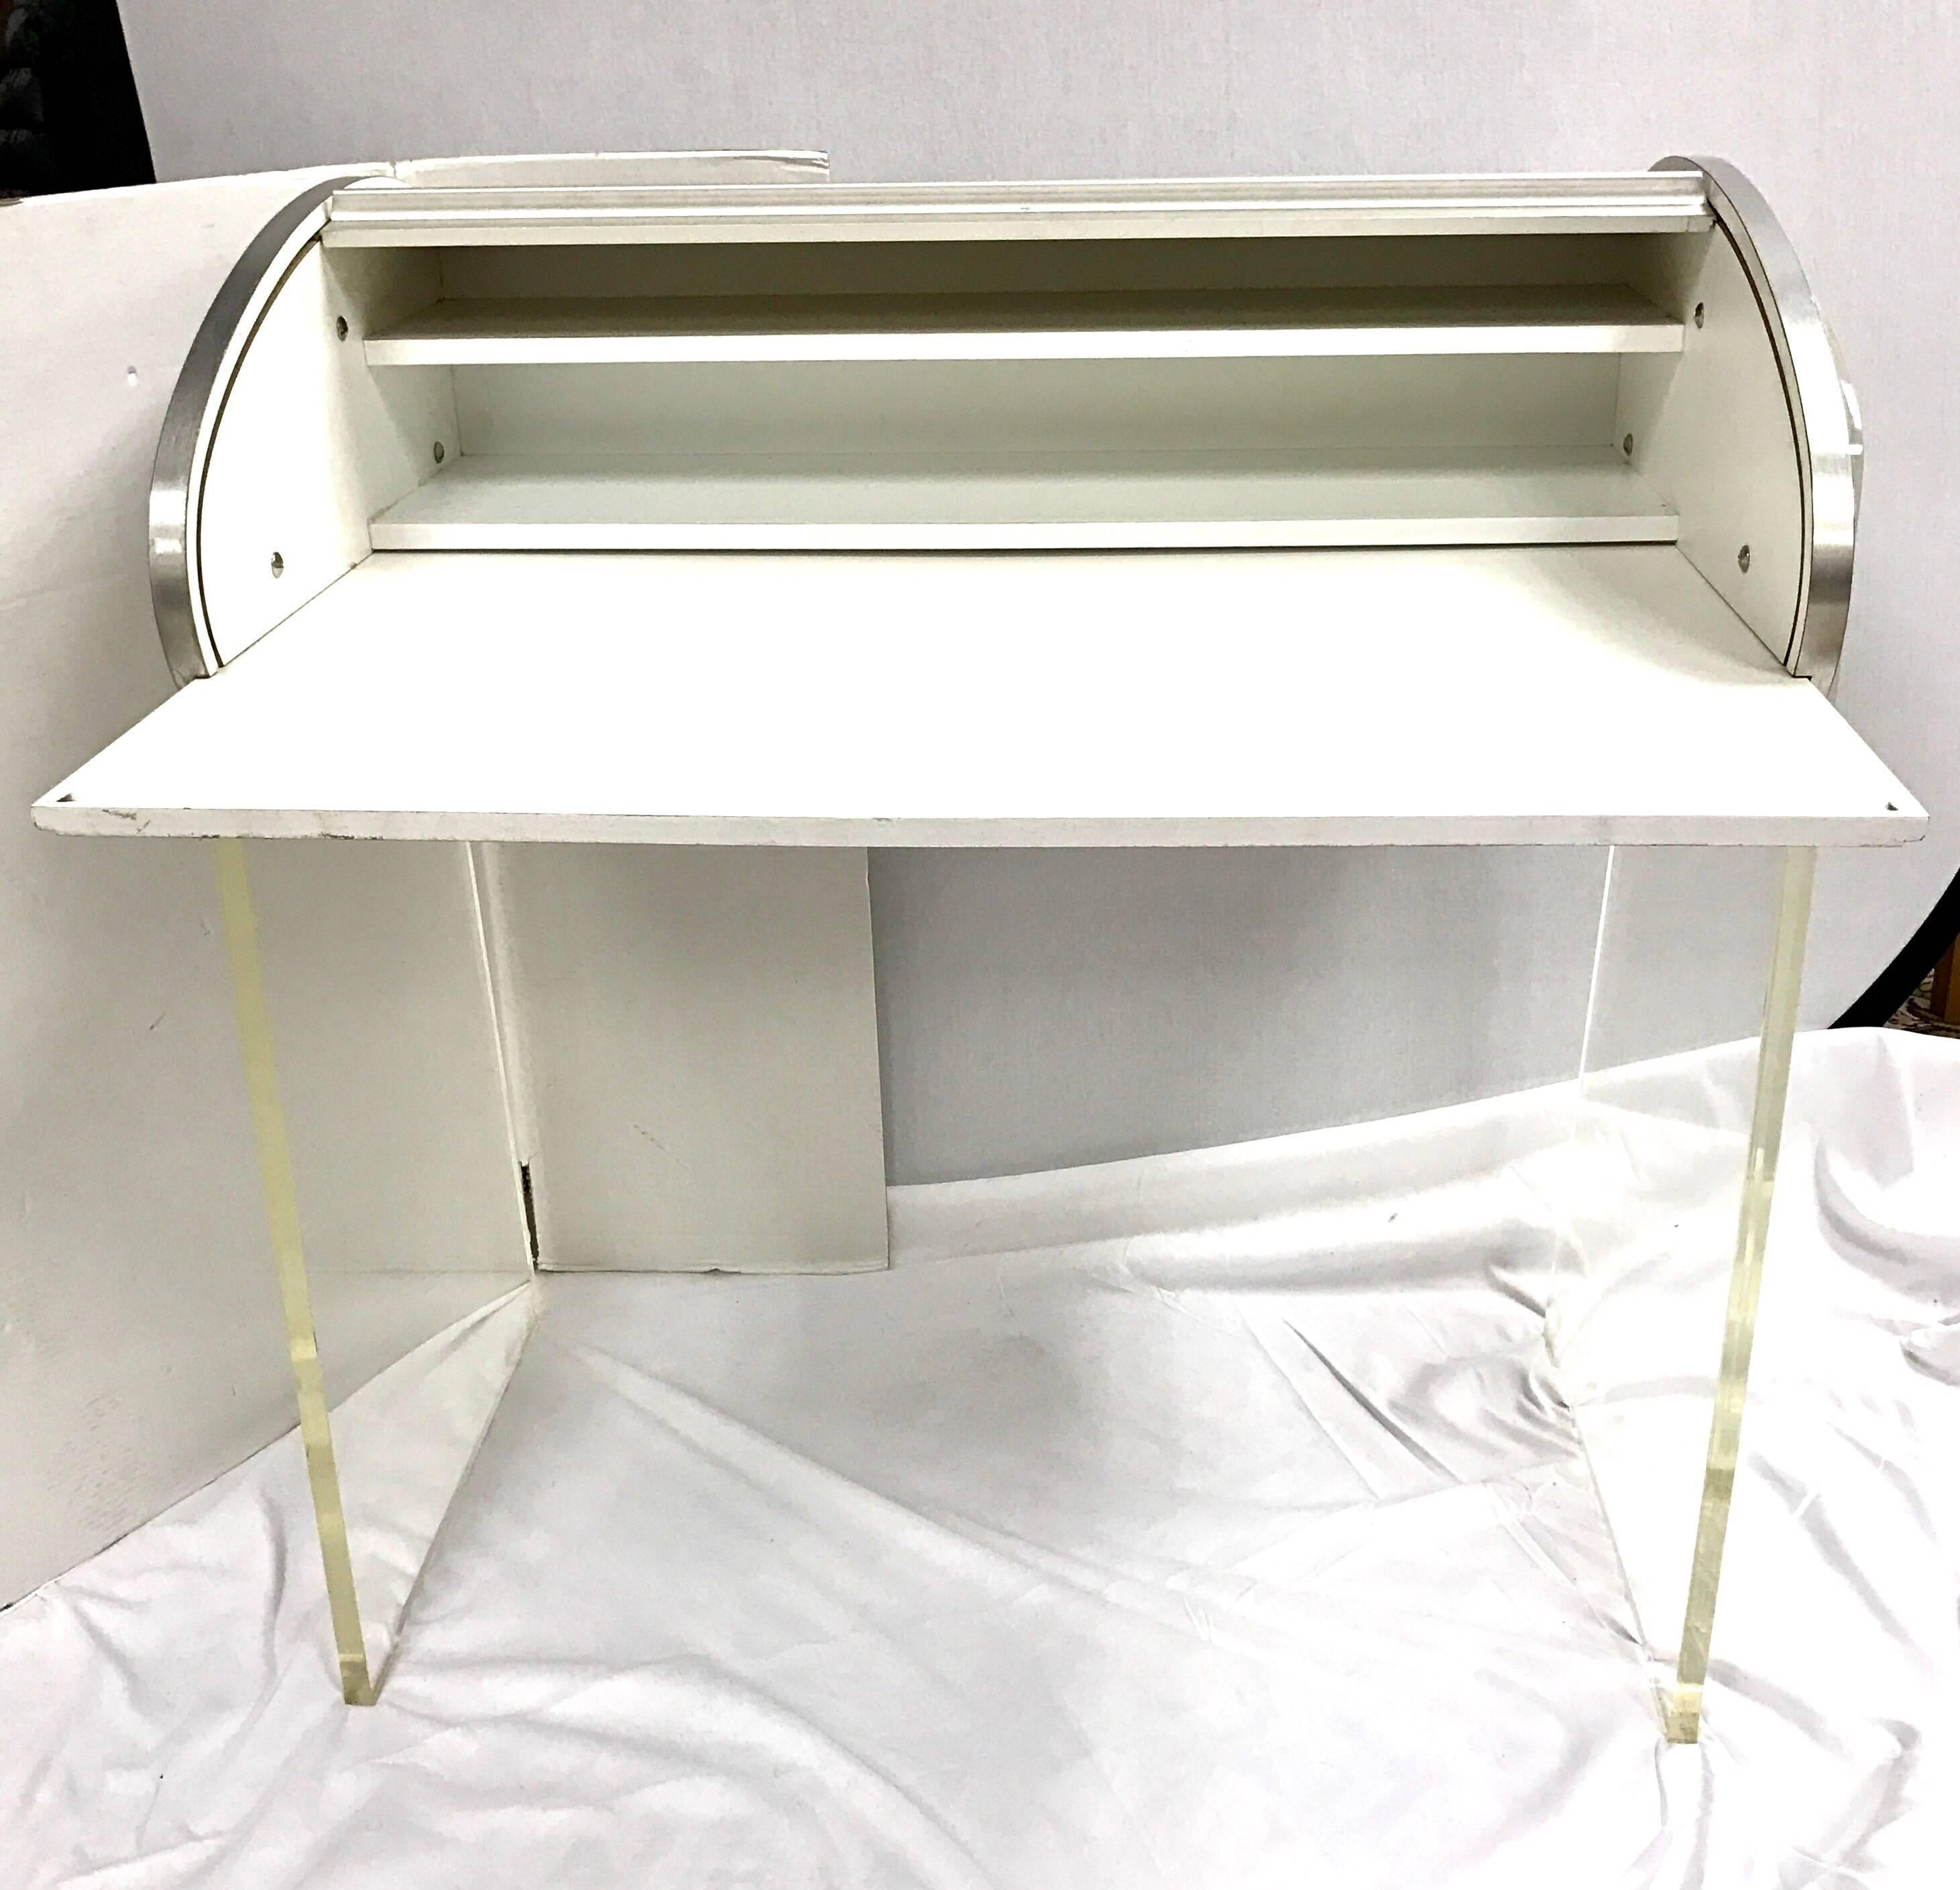 Midcentury aluminum roll top desk with a Lucite base. Writing area pulls out once top rolls open.
Writing surface pulls out to 31.5 W x 18 D.